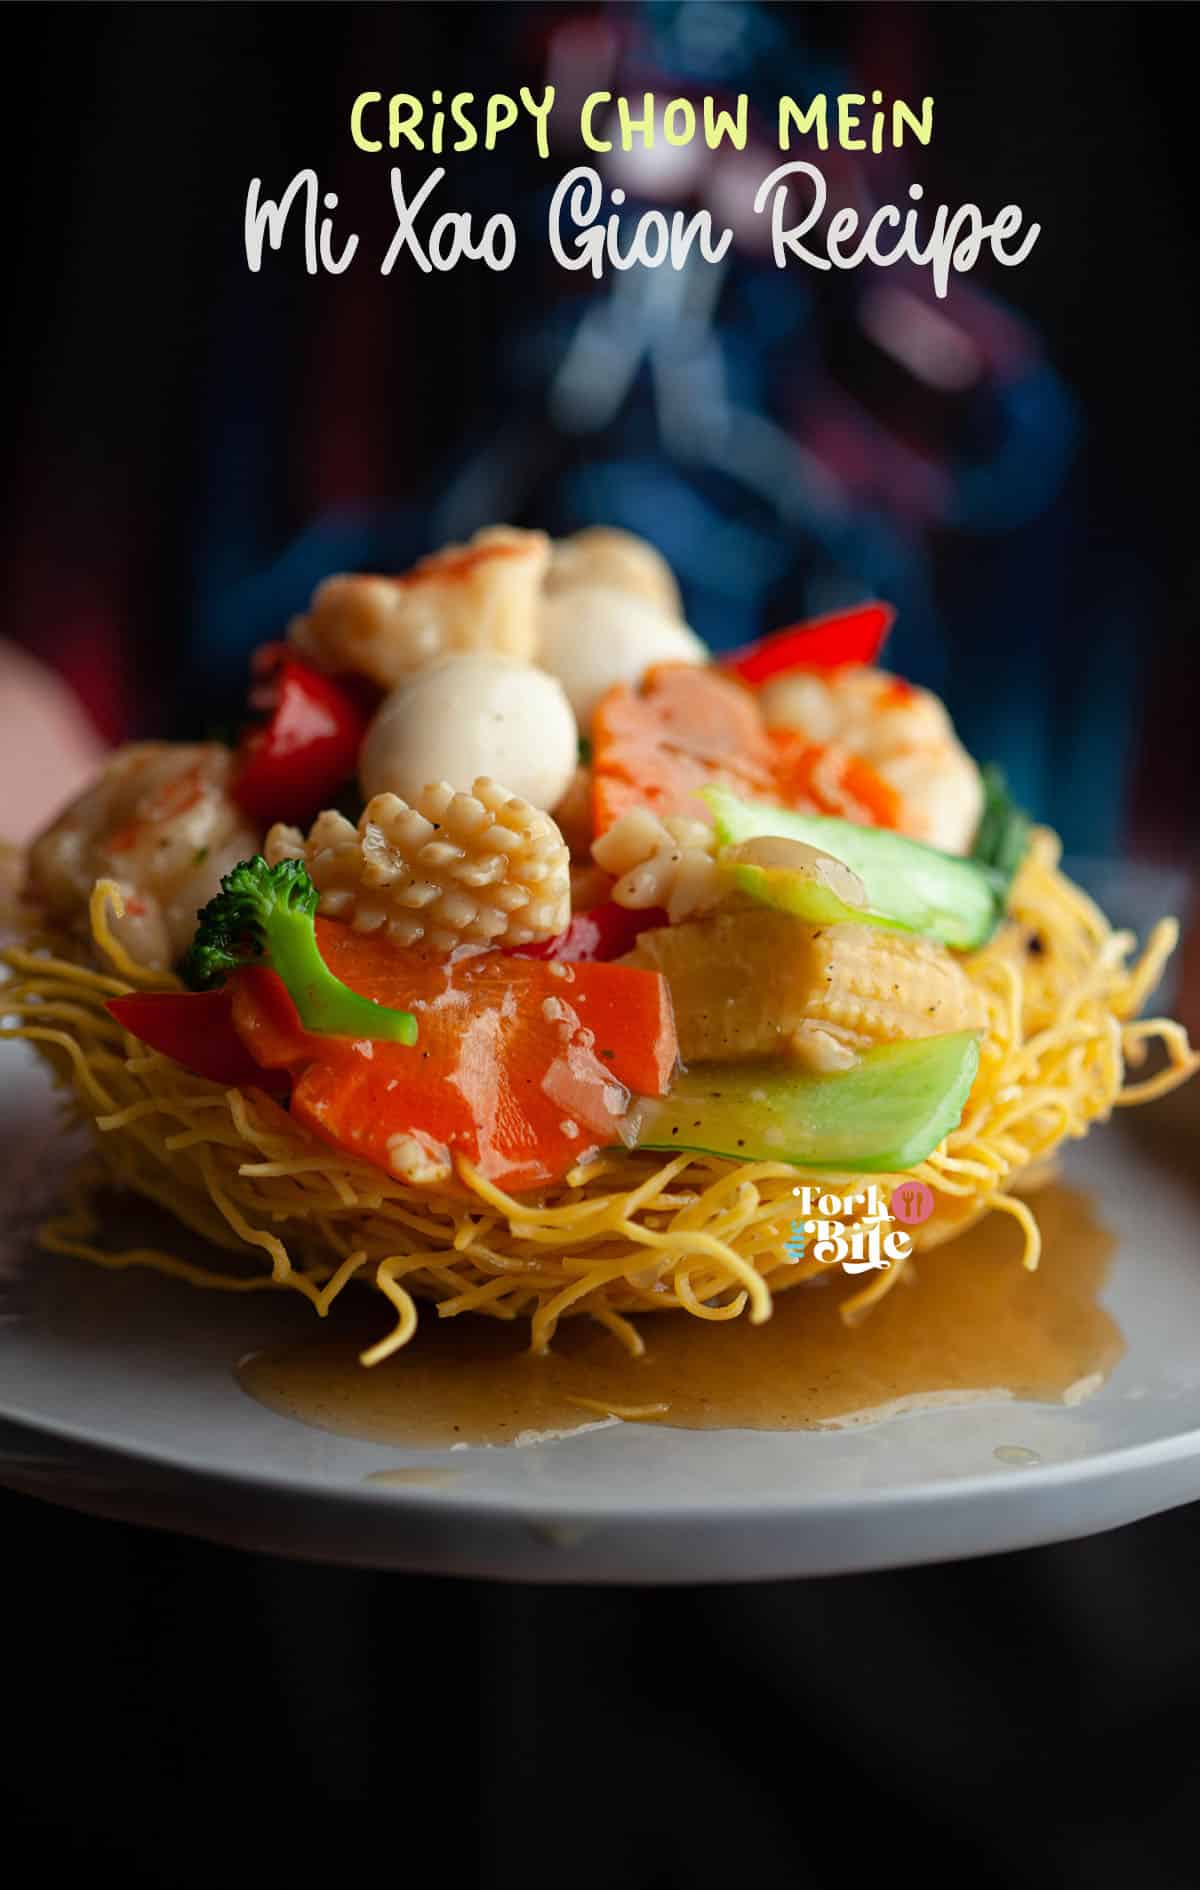 Indulge in the authentic flavors of Vietnam with this delicious Mi Xao Gion recipe. Savor the perfect blend of savory noodles, juicy stir-fried meats, and vegetables, all cooked perfectly with a rich sauce.